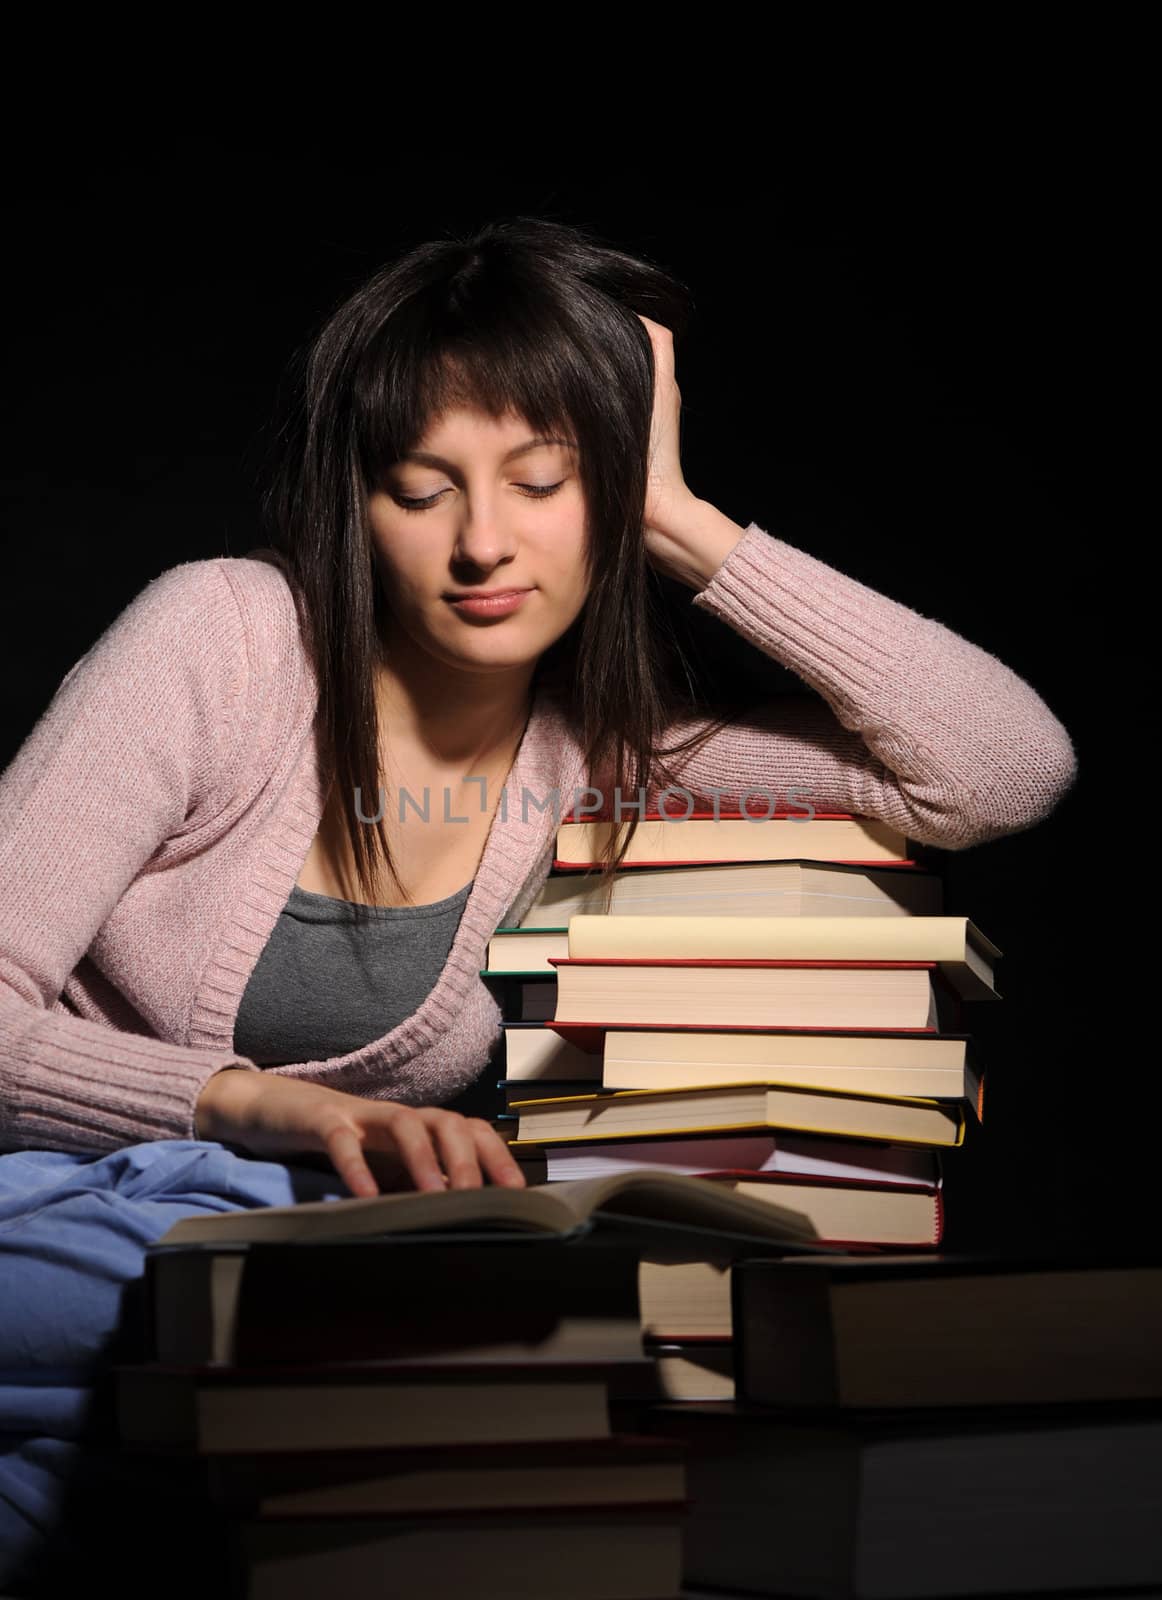 Cute girl studying with a big stack of books by stokkete